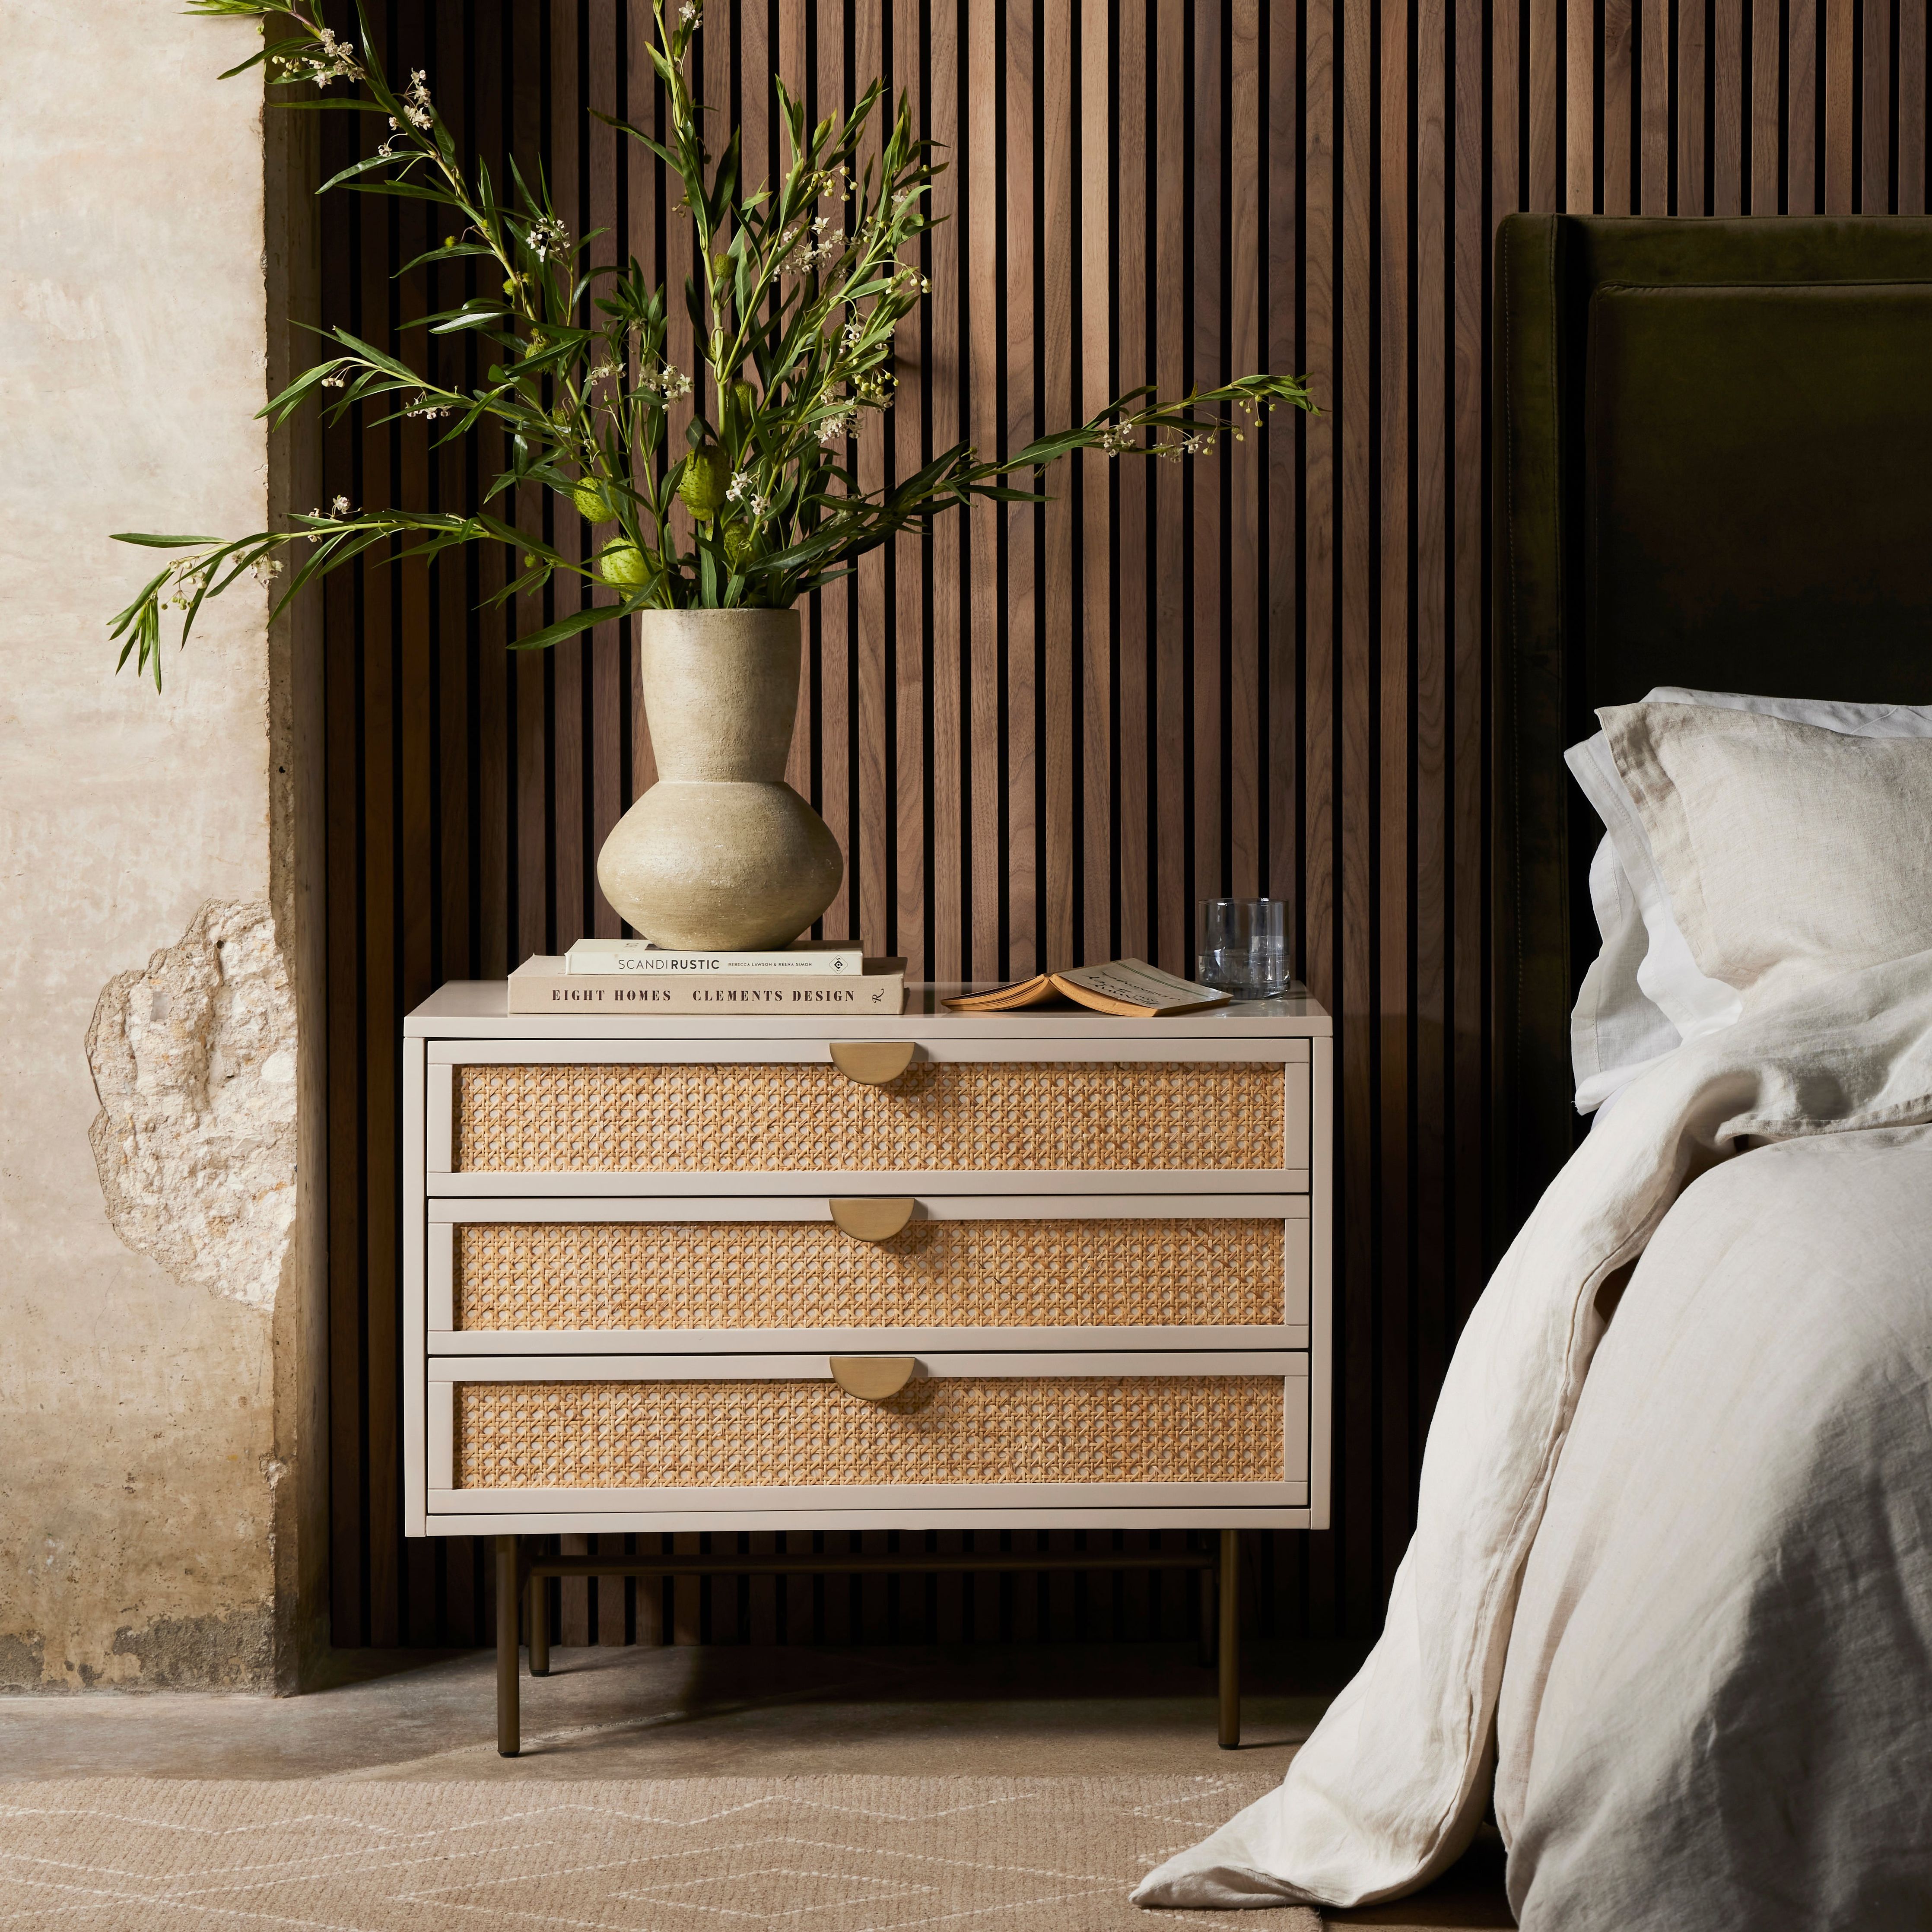 Bring a light, textural look to bedside storage. A lacquered three-drawer nightstand features woven cane panels and half-moon hardware finished in an aged brass. Amethyst Home provides interior design, new construction, custom furniture, and area rugs in the Newport Beach metro area.